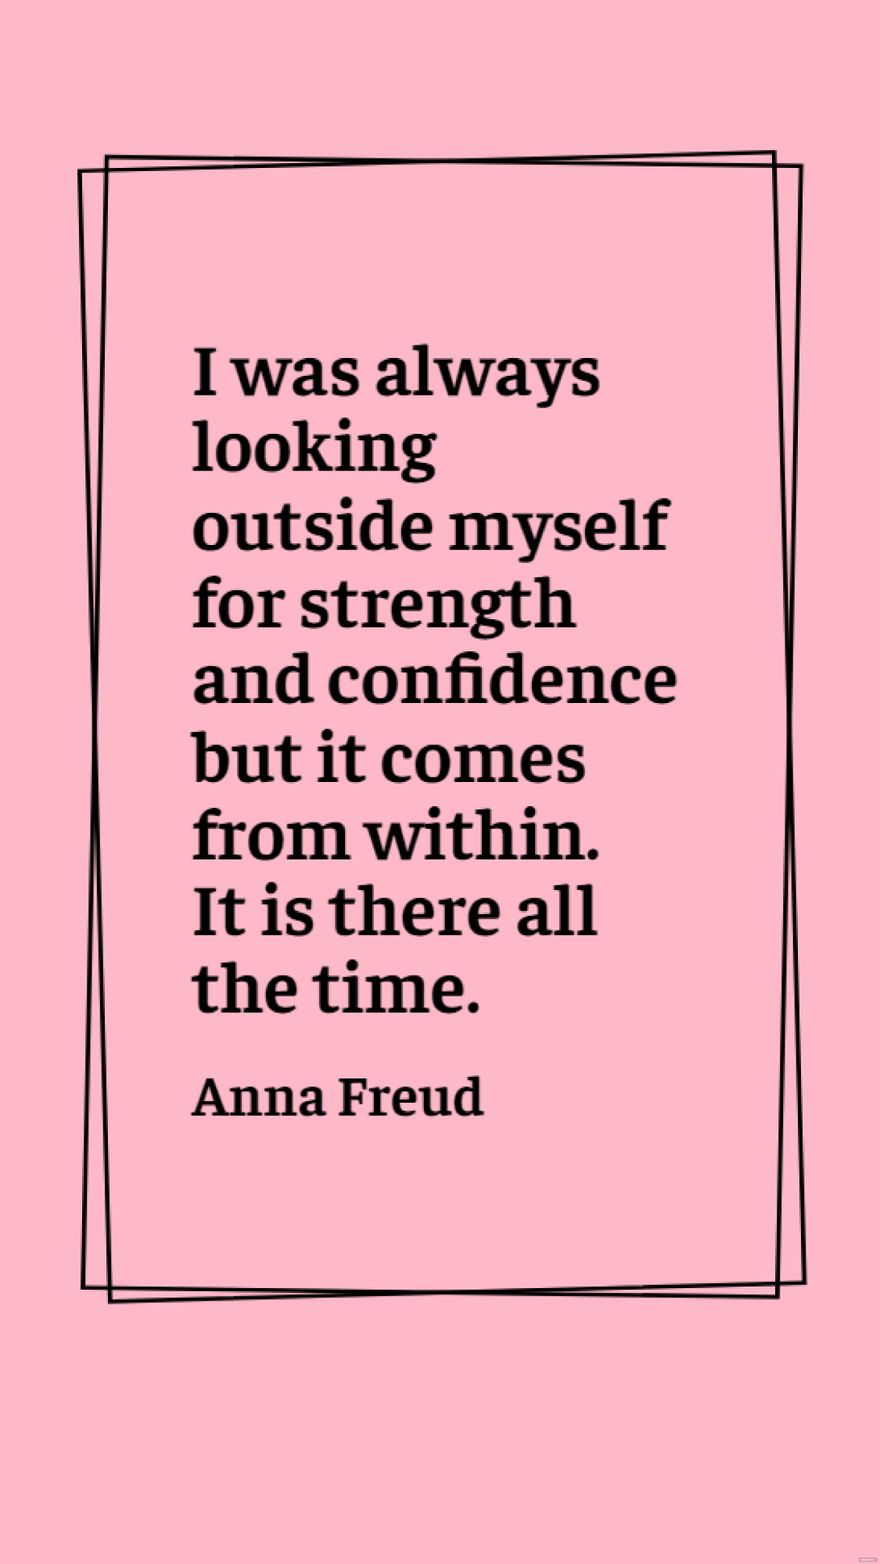 Anna Freud - I was always looking outside myself for strength and confidence but it comes from within. It is there all the time. in JPG